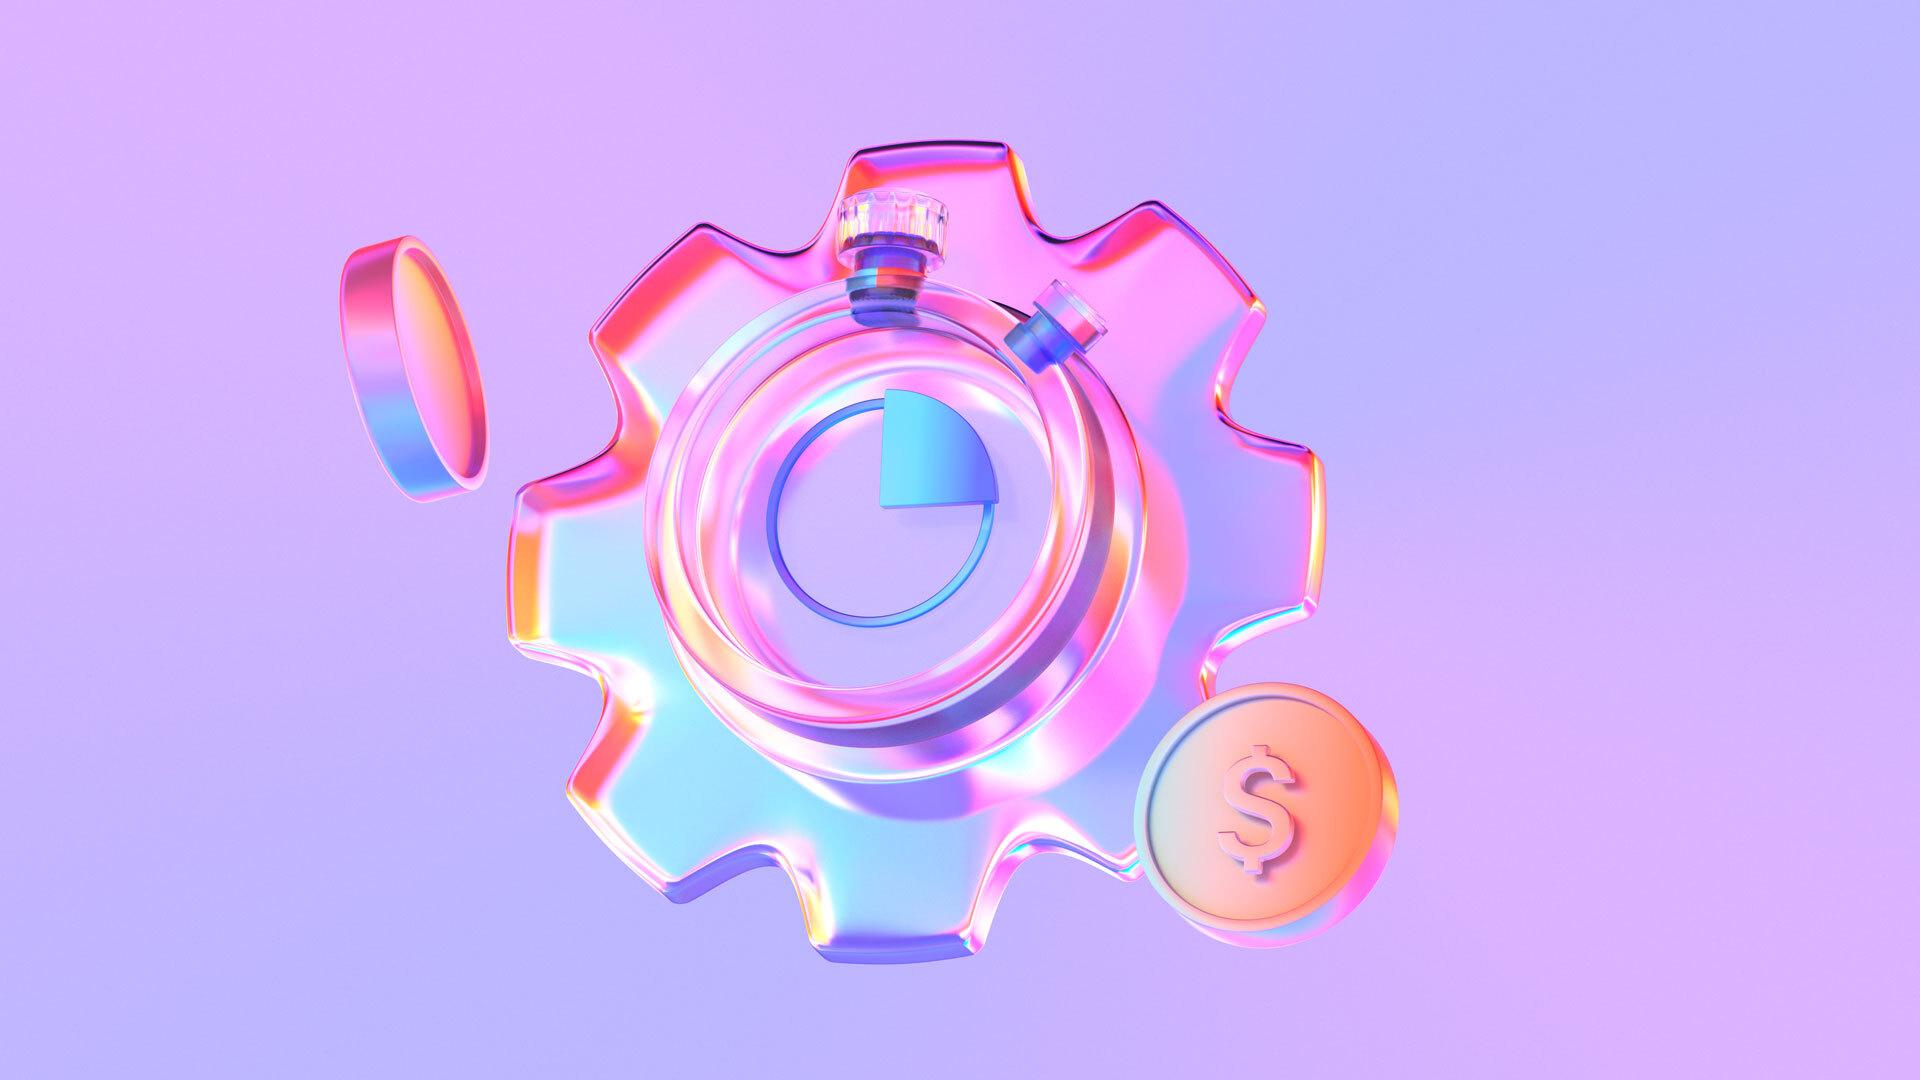 3D illustration of a gear and coins representing the concept of becoming a paid product tester